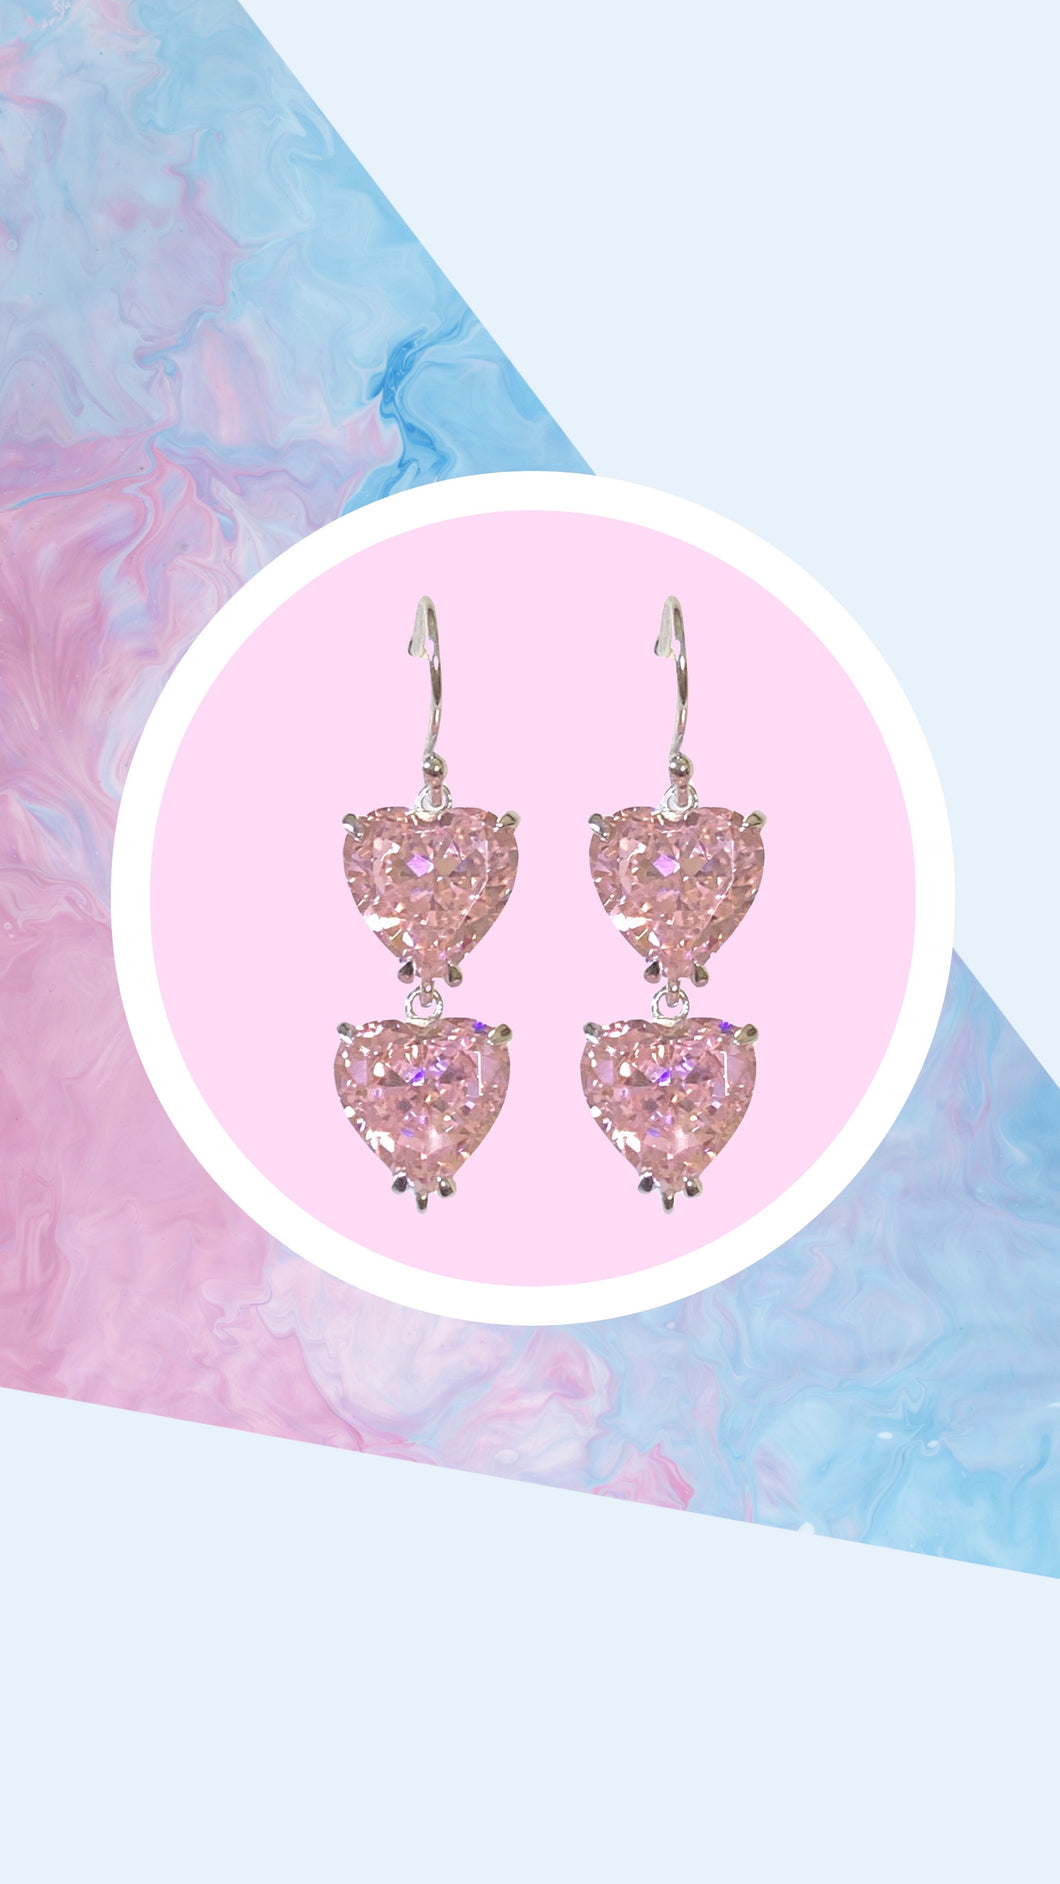 Crystal Heart Drop Earrings with Lab-grown gemstones and Sterling Silver - Pink